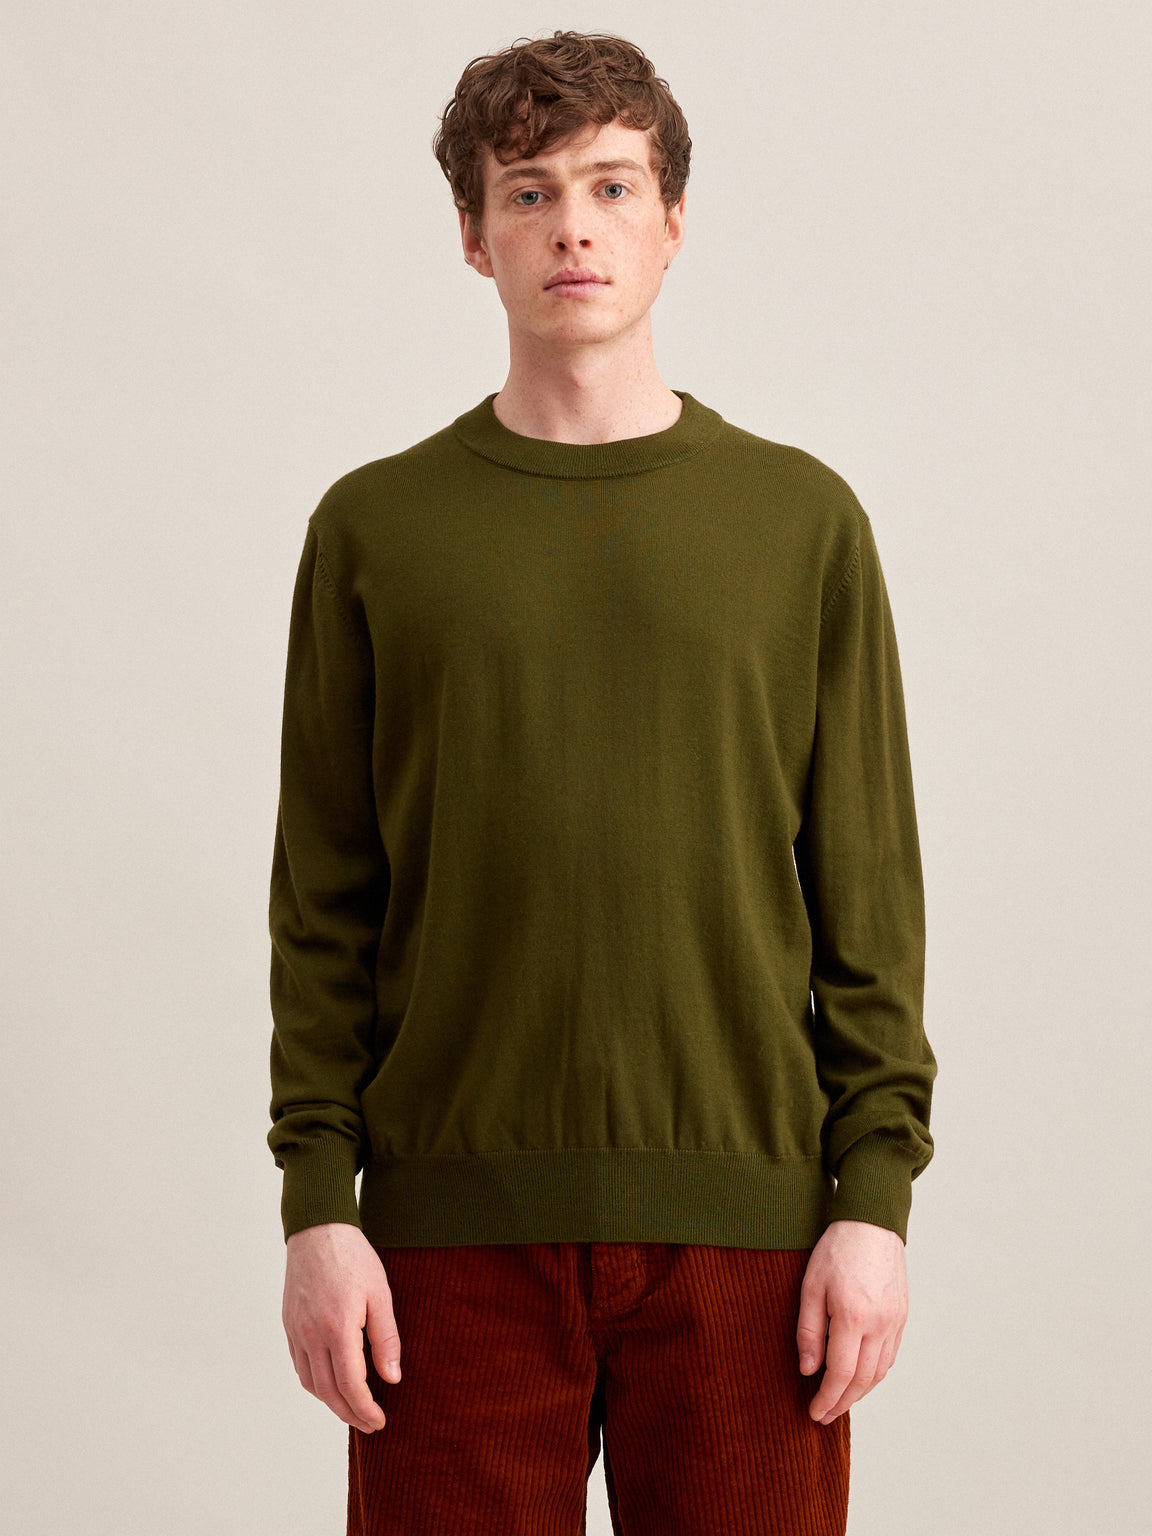 DILLIV SWEATER MILITARY